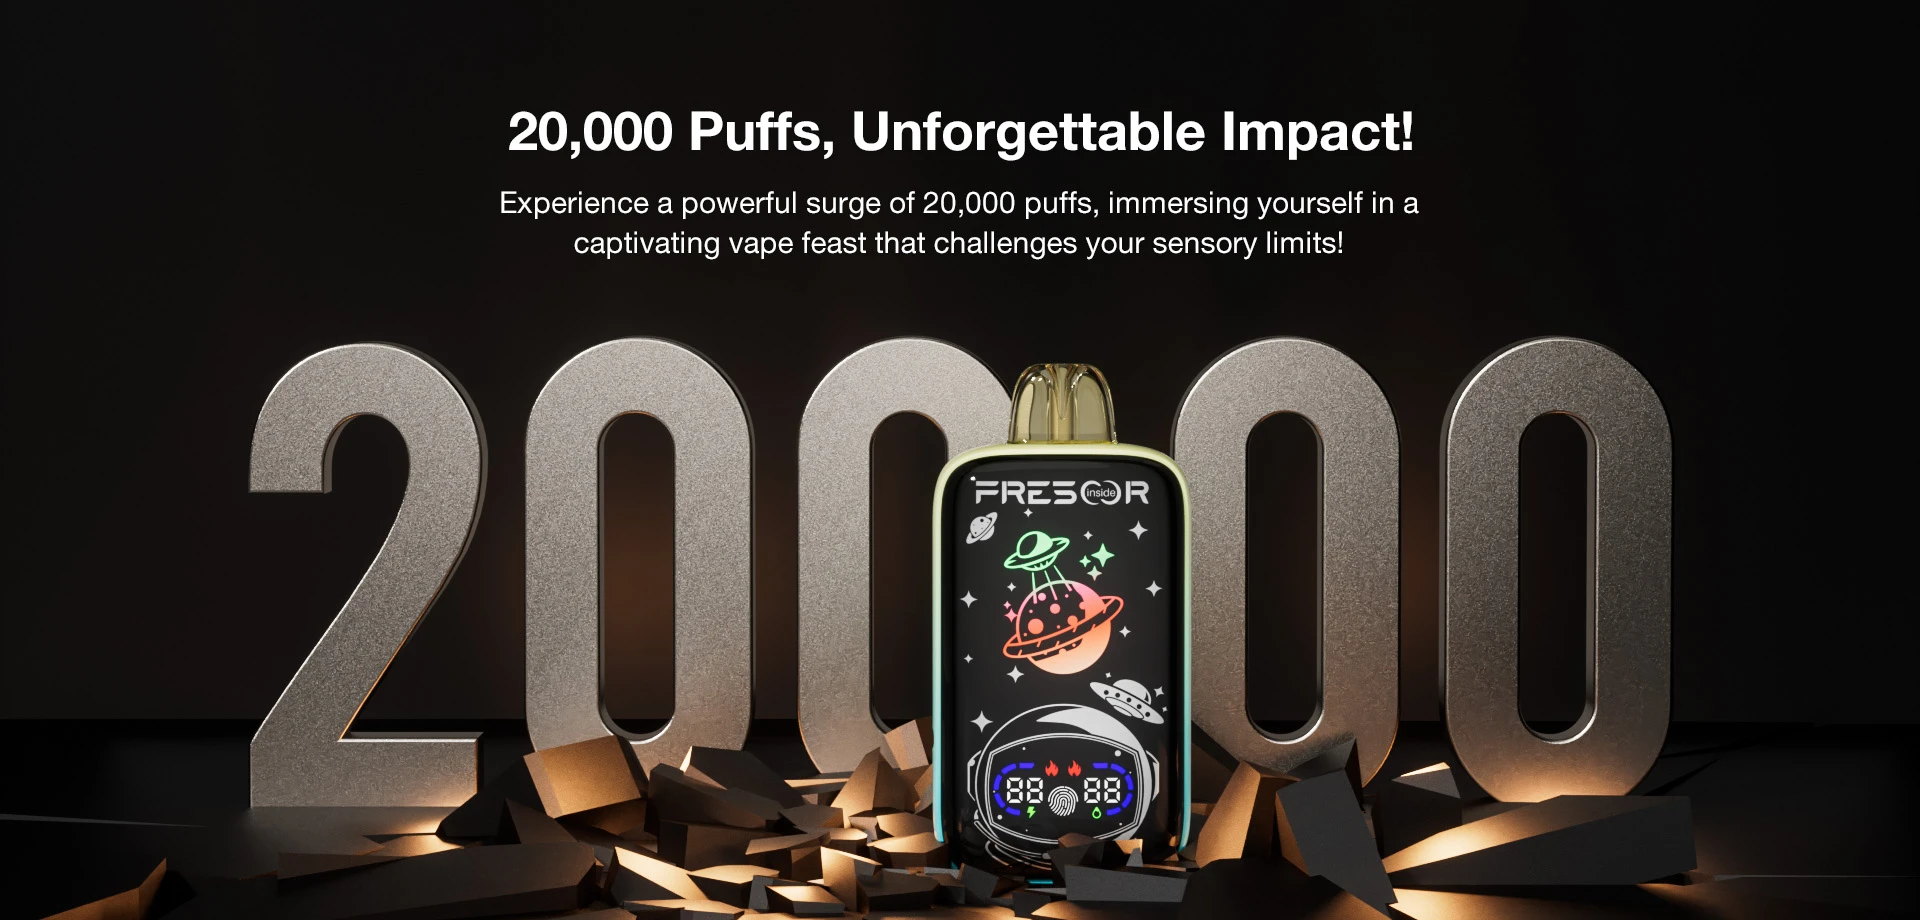 20,000 Puffs, Unforgettable lmpact! Experience a powerful surge of 20,000 puffs, immersing yourself in a captivating vape feast that challenges your sensory limits!